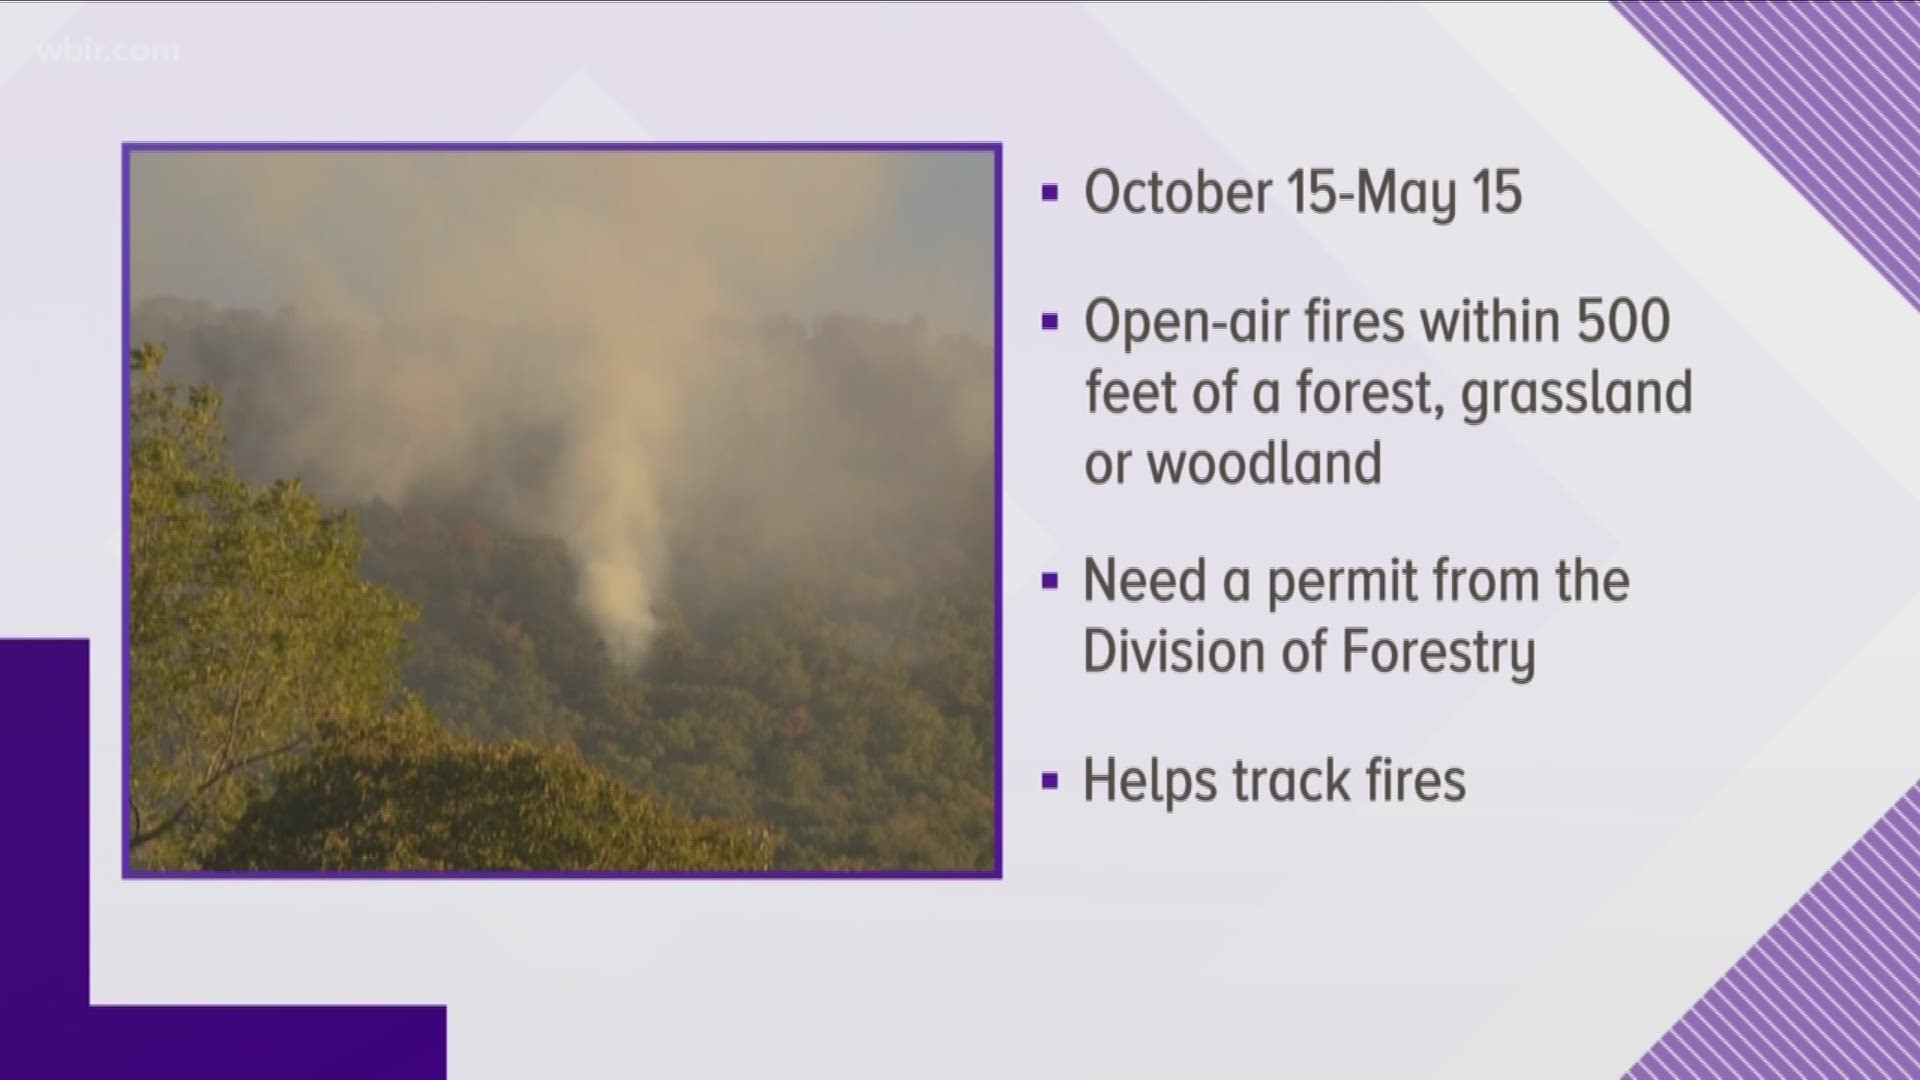 Fall is in the air, and fire season is officially underway in Tennessee.